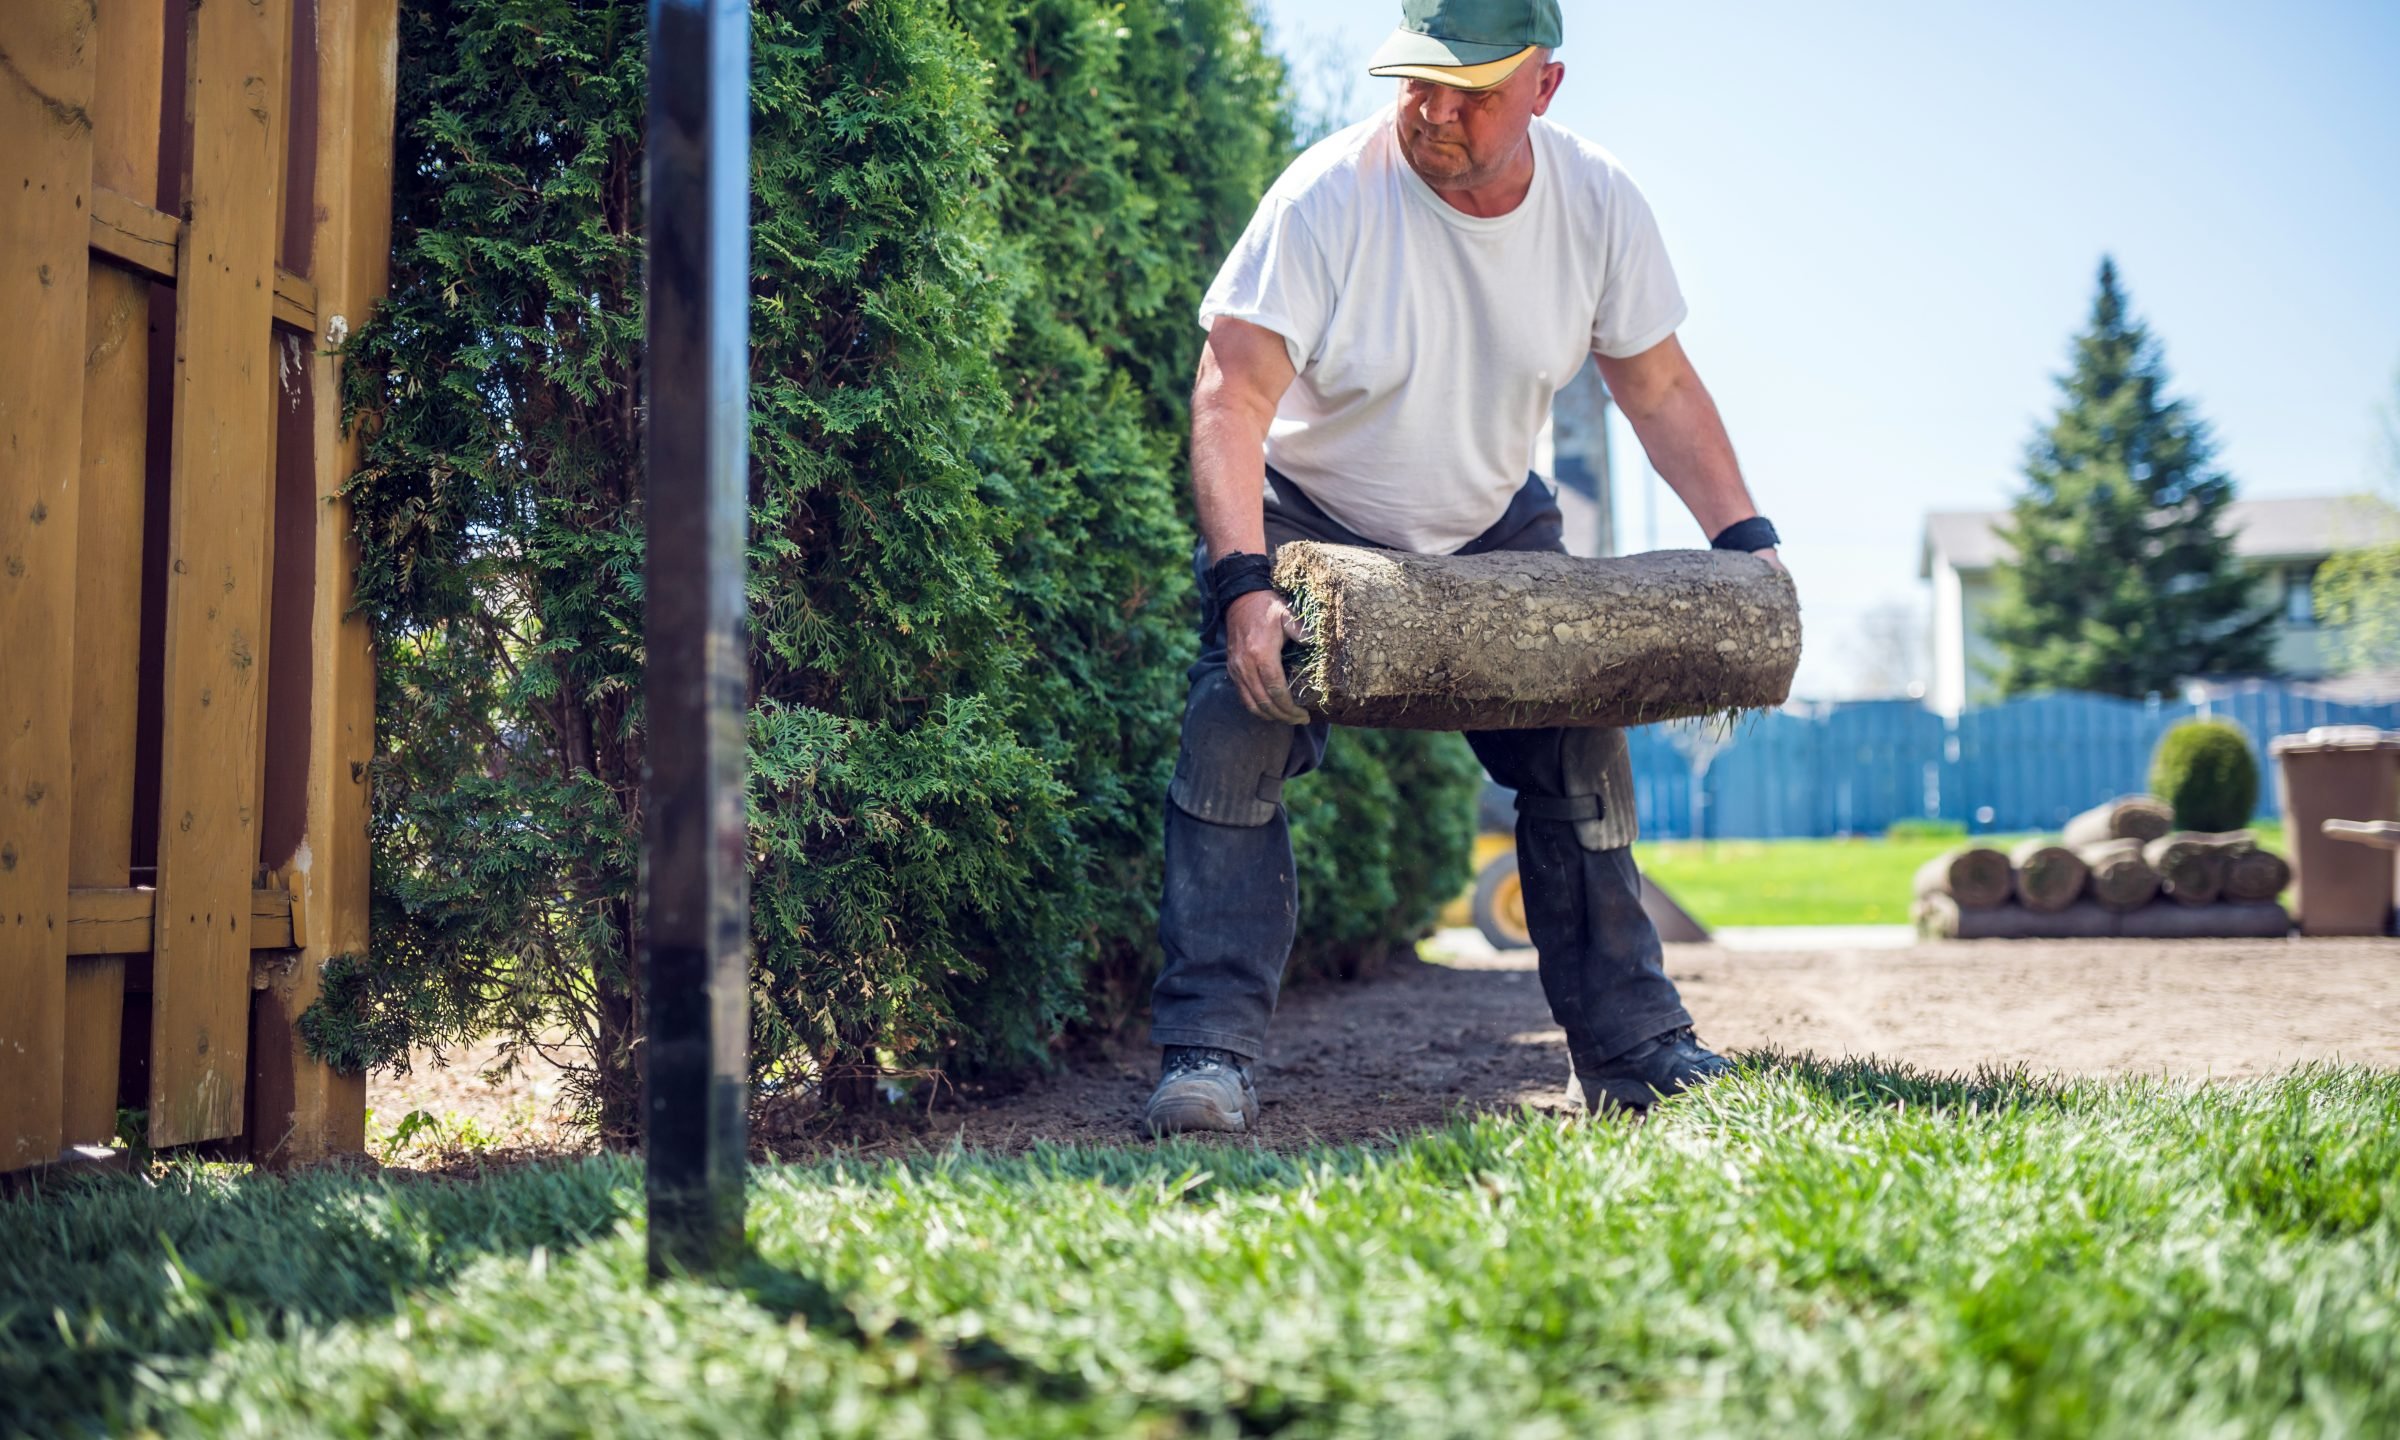 A Landscaping Or Lawn Care Business, How Much Does A Professional Landscaper Make